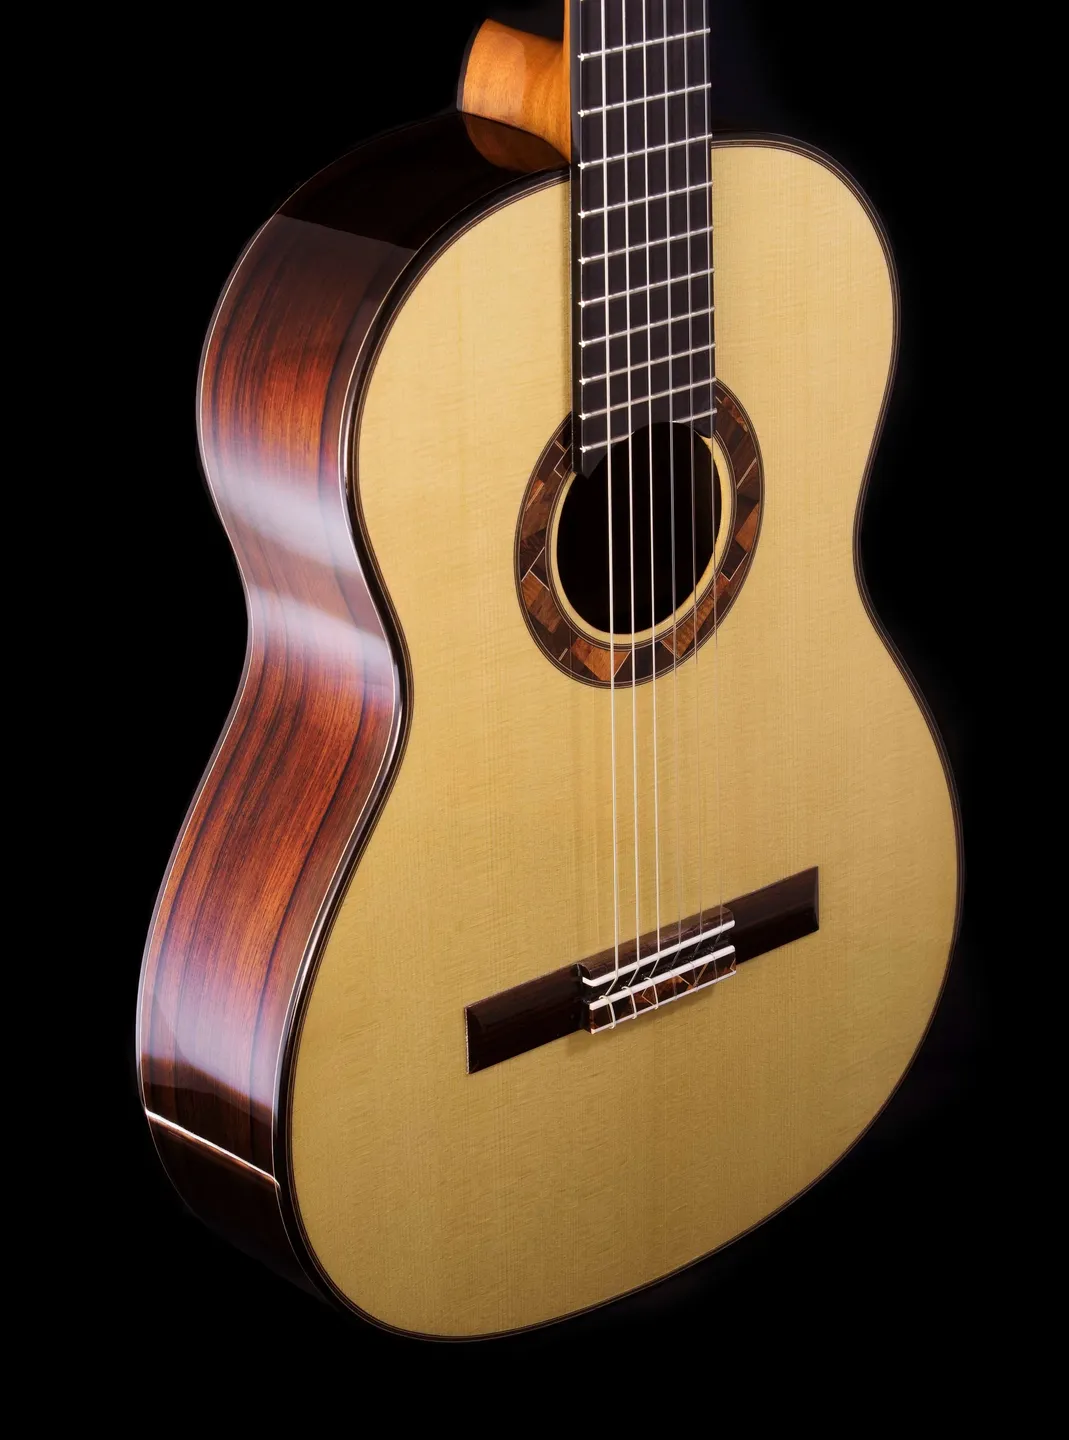 A beautifully crafted guitar with beautiful color